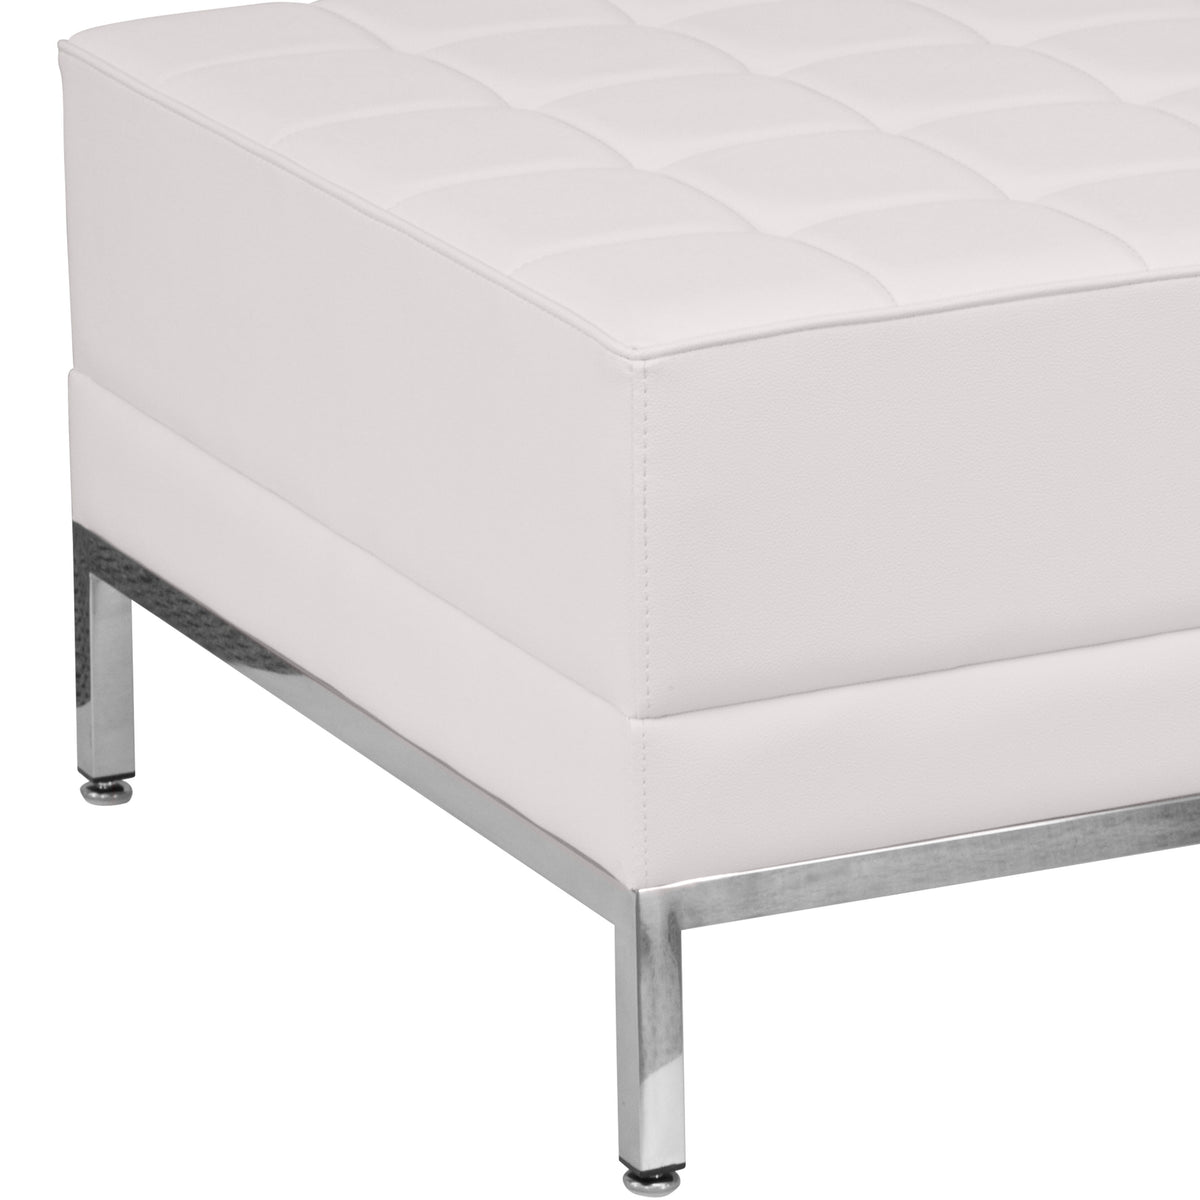 Melrose White |#| White LeatherSoft Quilted Tufted Modular Ottoman with Stainless Steel Legs